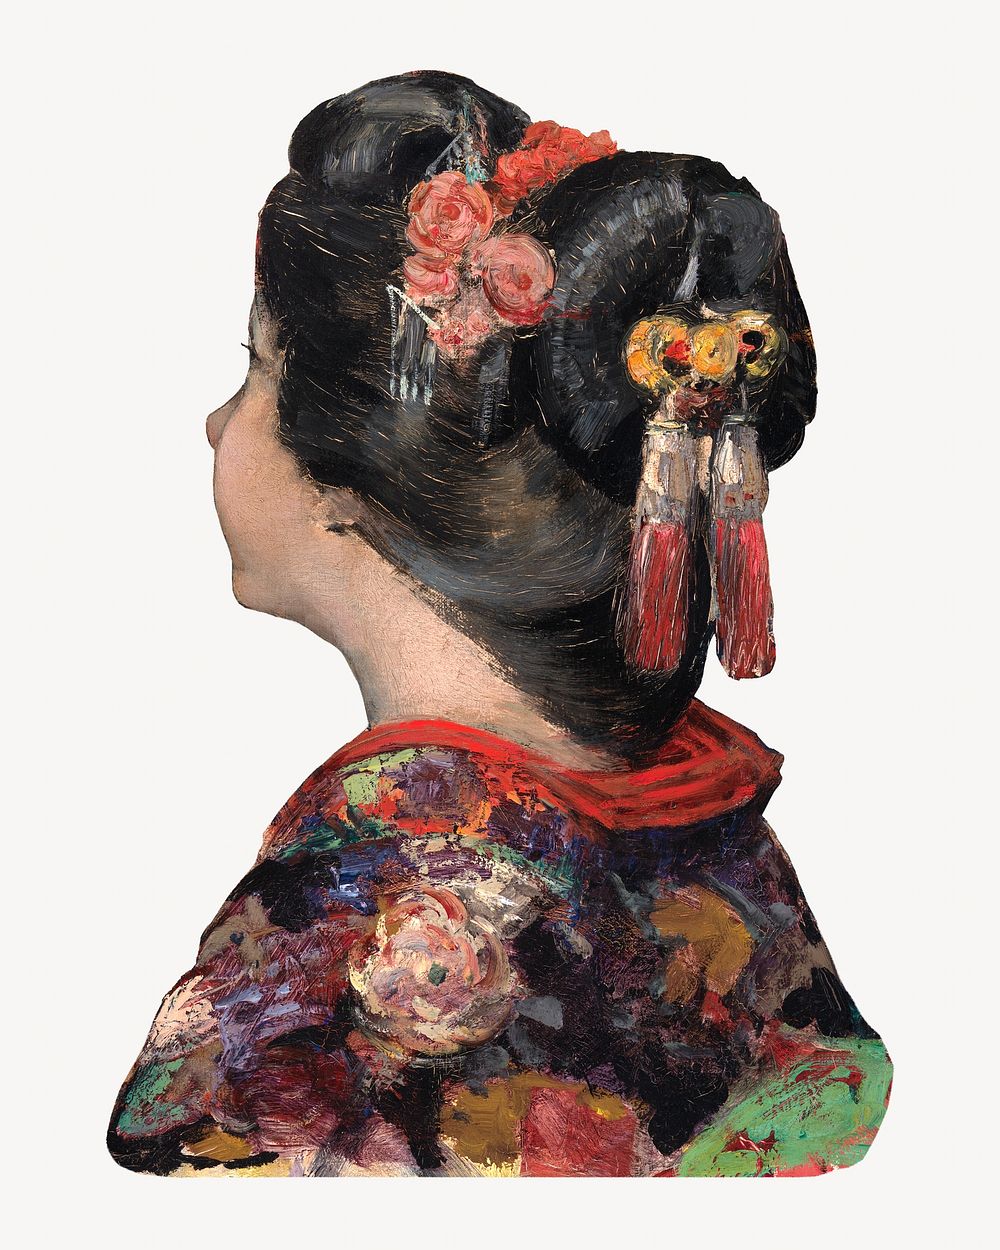 Japanese woman in traditional robe, vintage illustration by Edward Atkinson Hornel. Remixed by rawpixel.